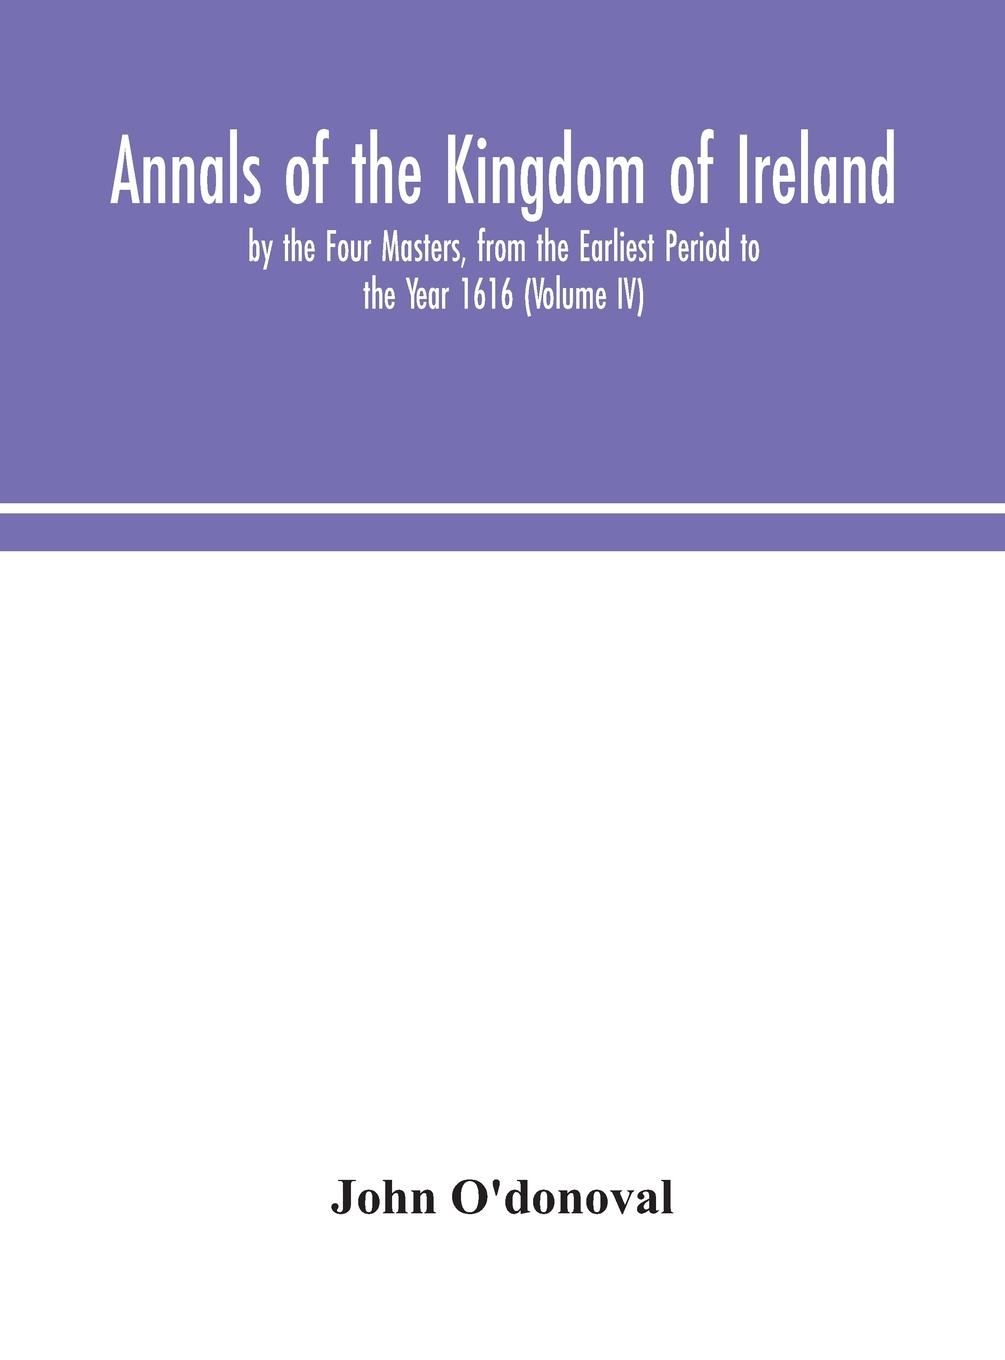 Carte Annals of the Kingdom of Ireland, by the Four Masters, from the Earliest Period to the Year 1616 (Volume IV) 